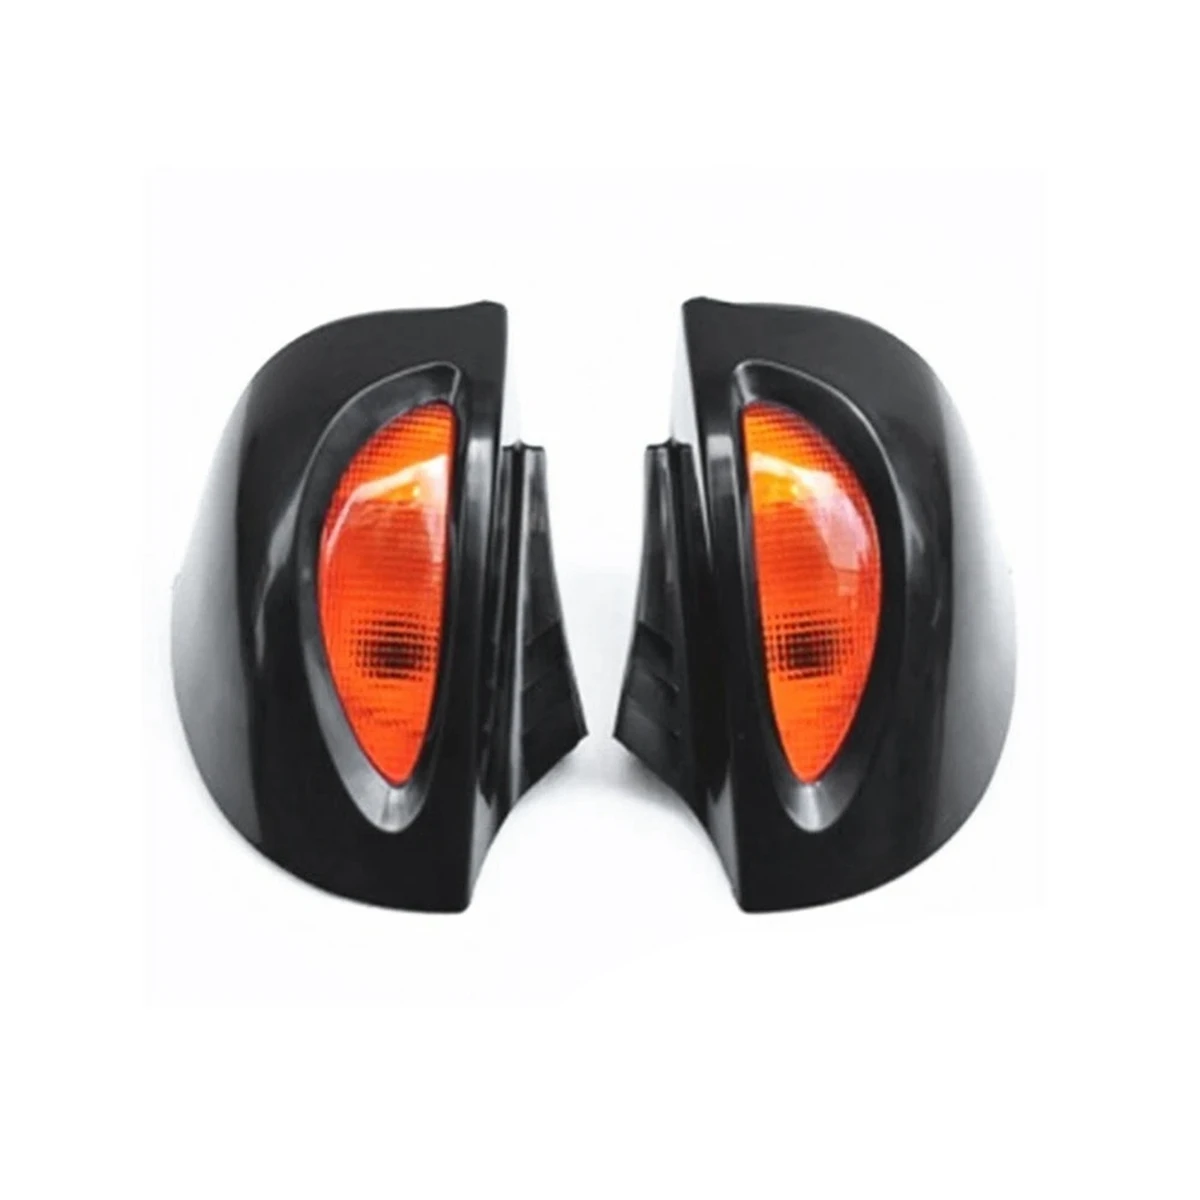 

Black Motorcycle Rear View Mirrors Turn Signals Lights Cover Motocross Mirror for - R1100 RT R1100 R1150 RT